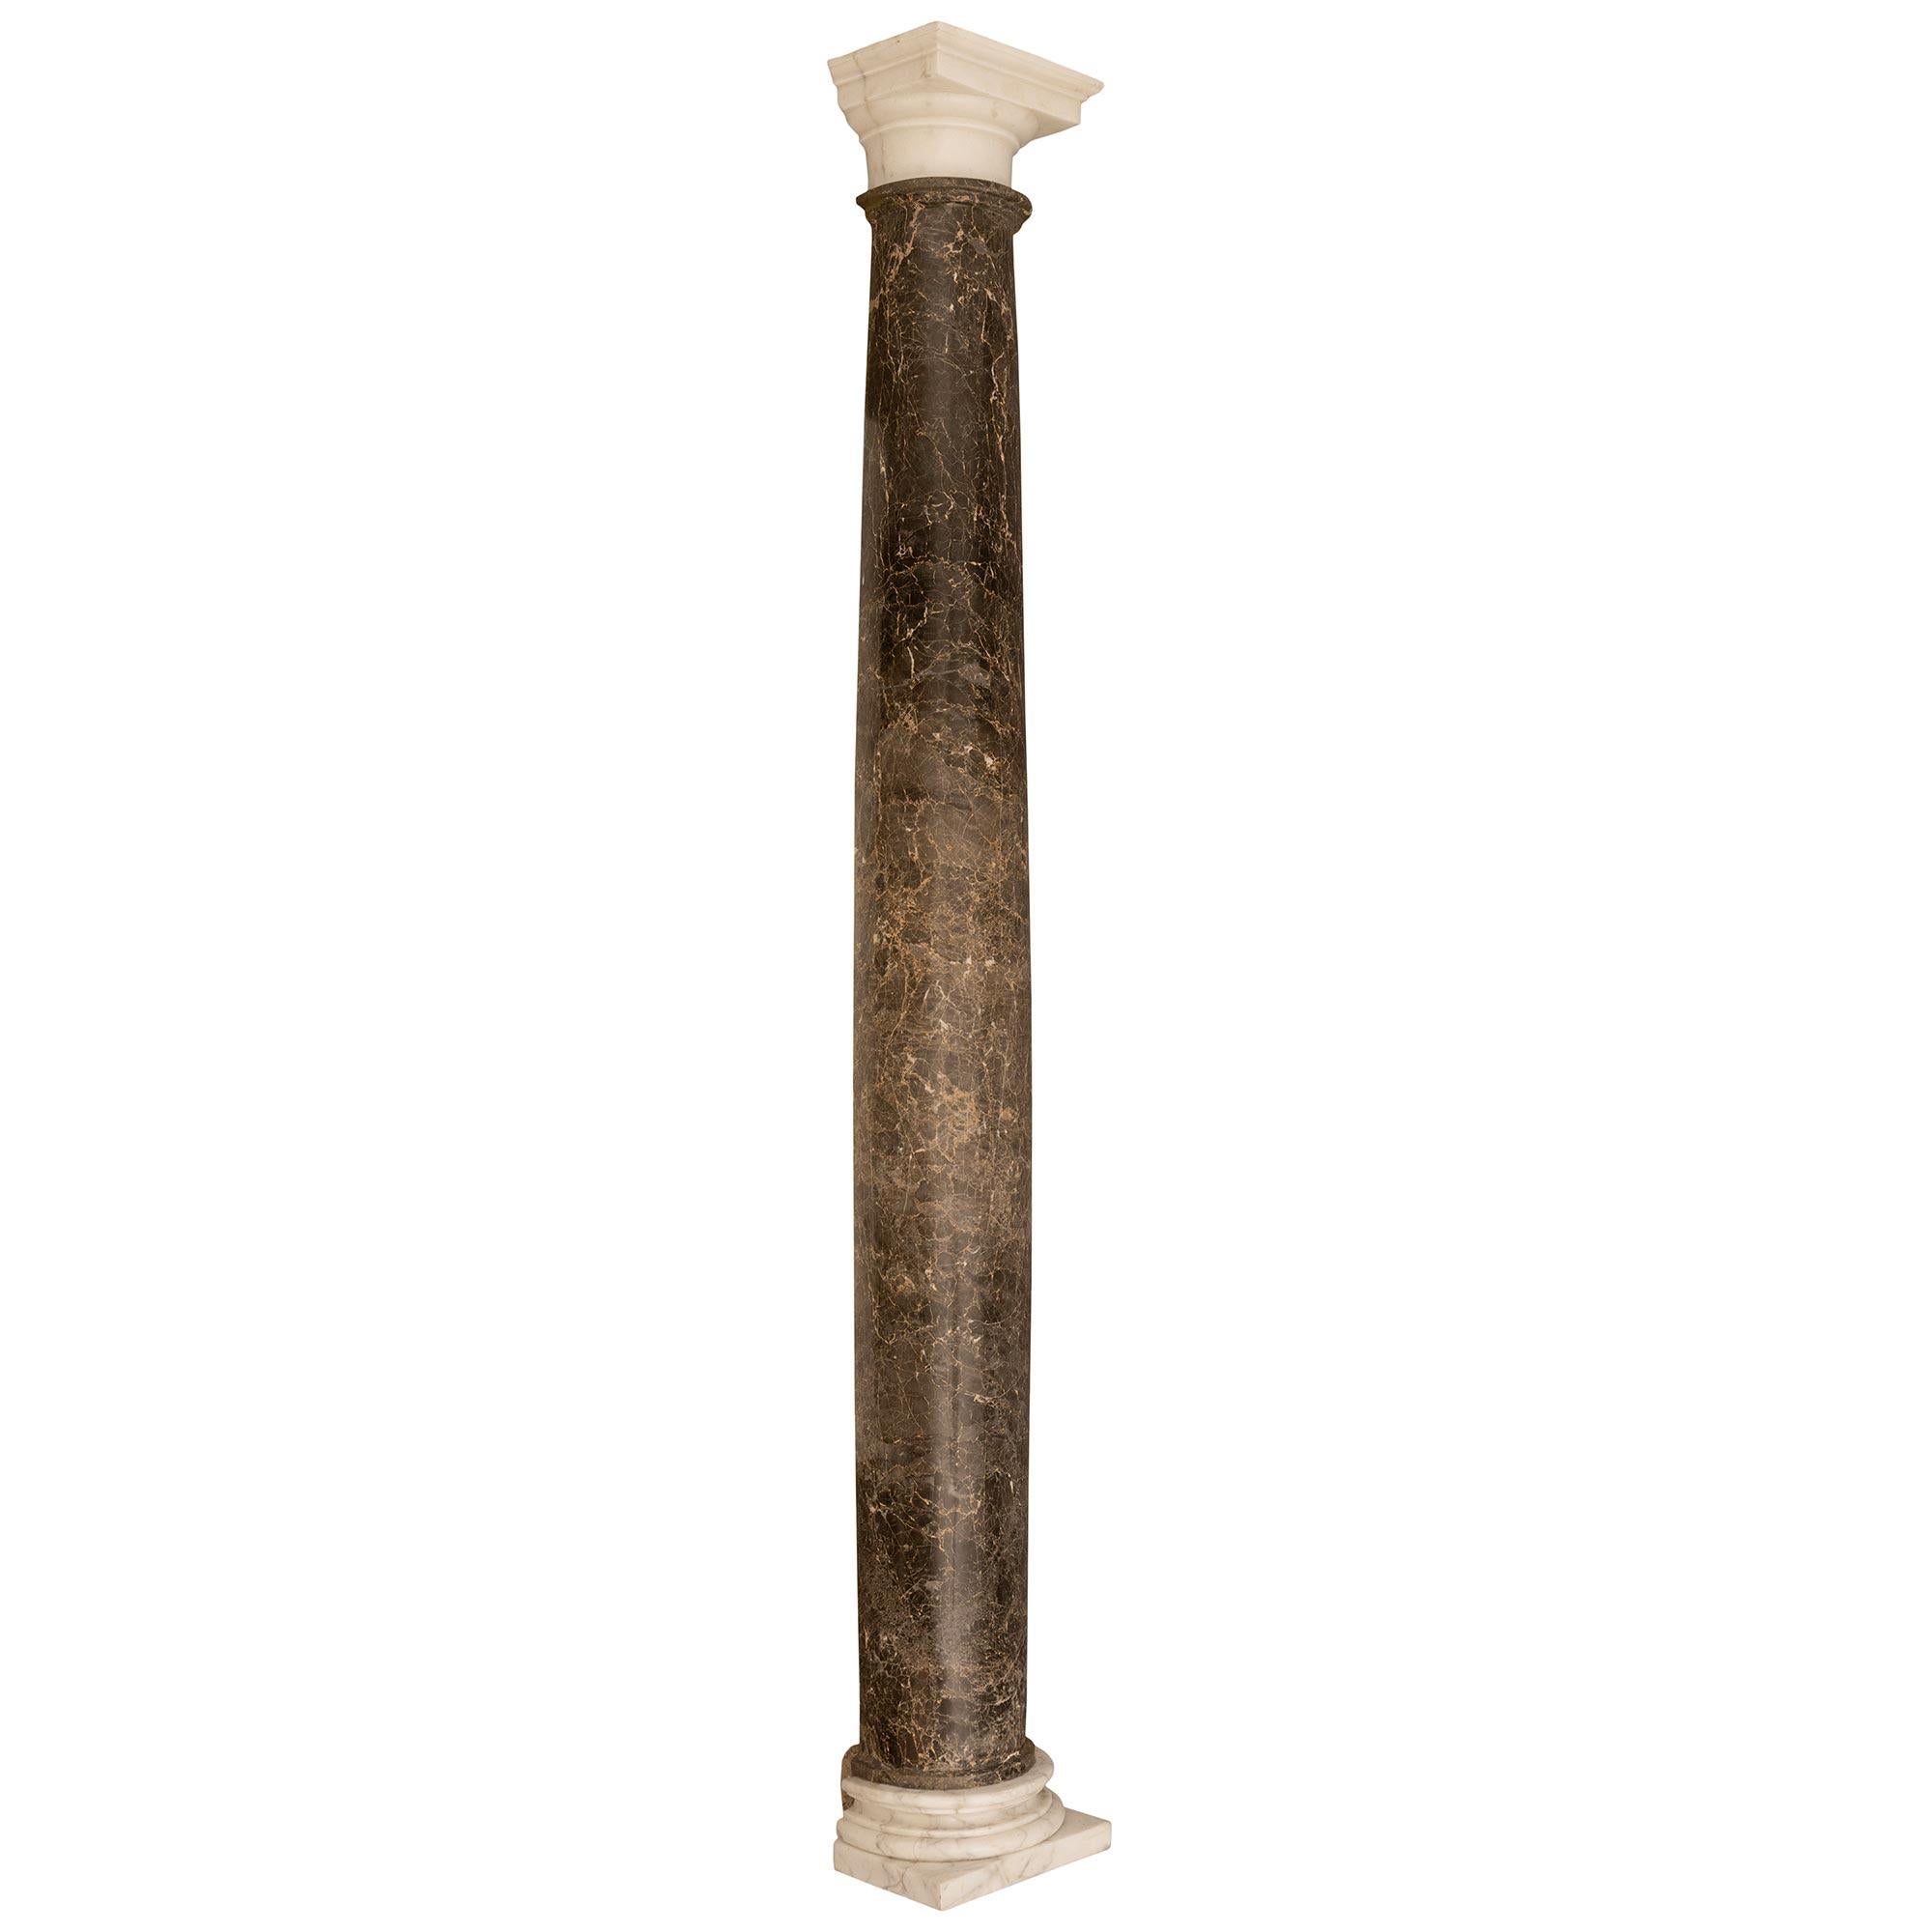 A handsome and extremely decorative pair of Italian 19th century marble columns. Each half round column is raised on their original White Carrara marble mottled plinth and top capital. The central tapered half round columns are in a grey Breccia